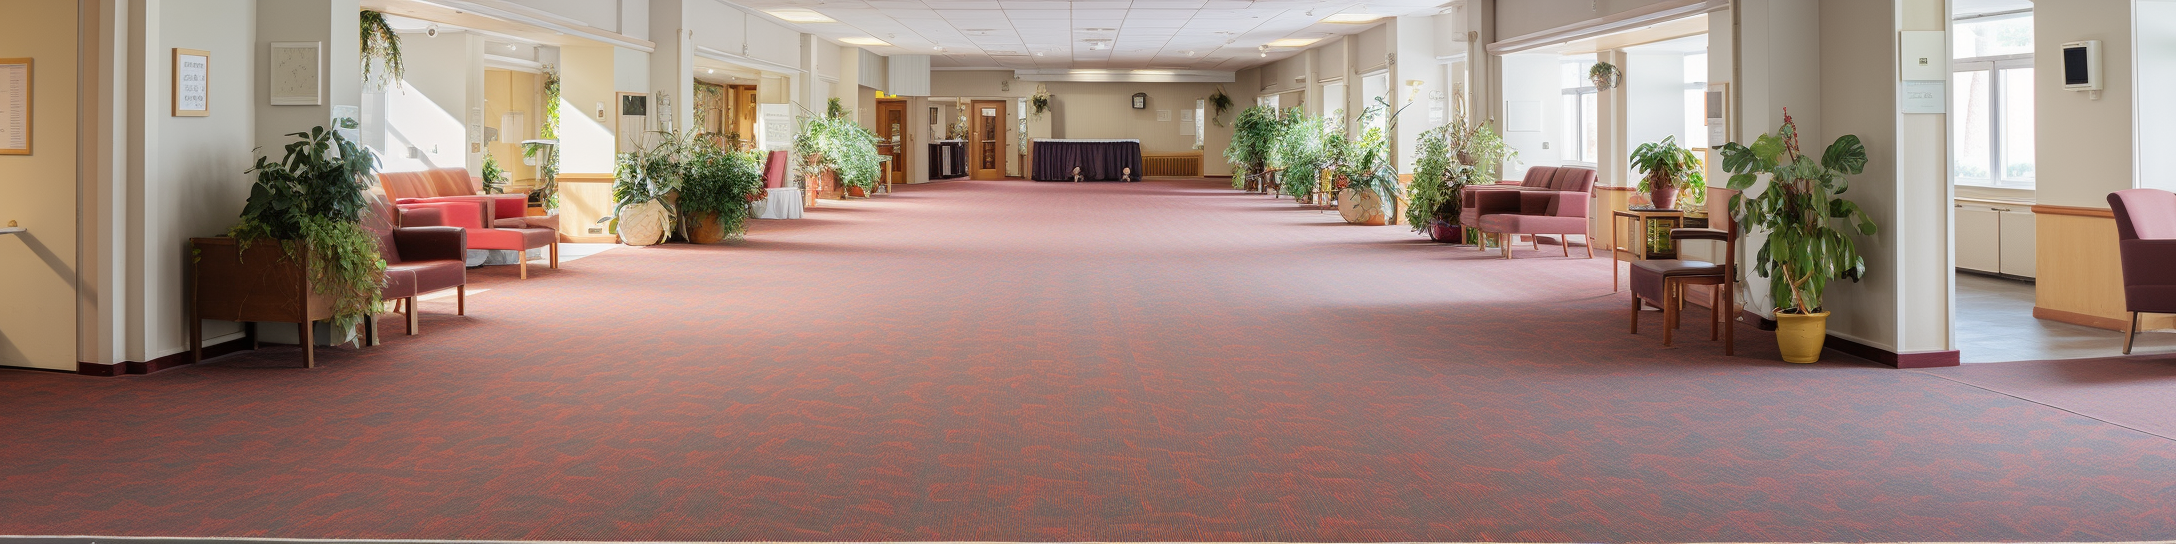 Clean Carpets in the Hospitality Industry